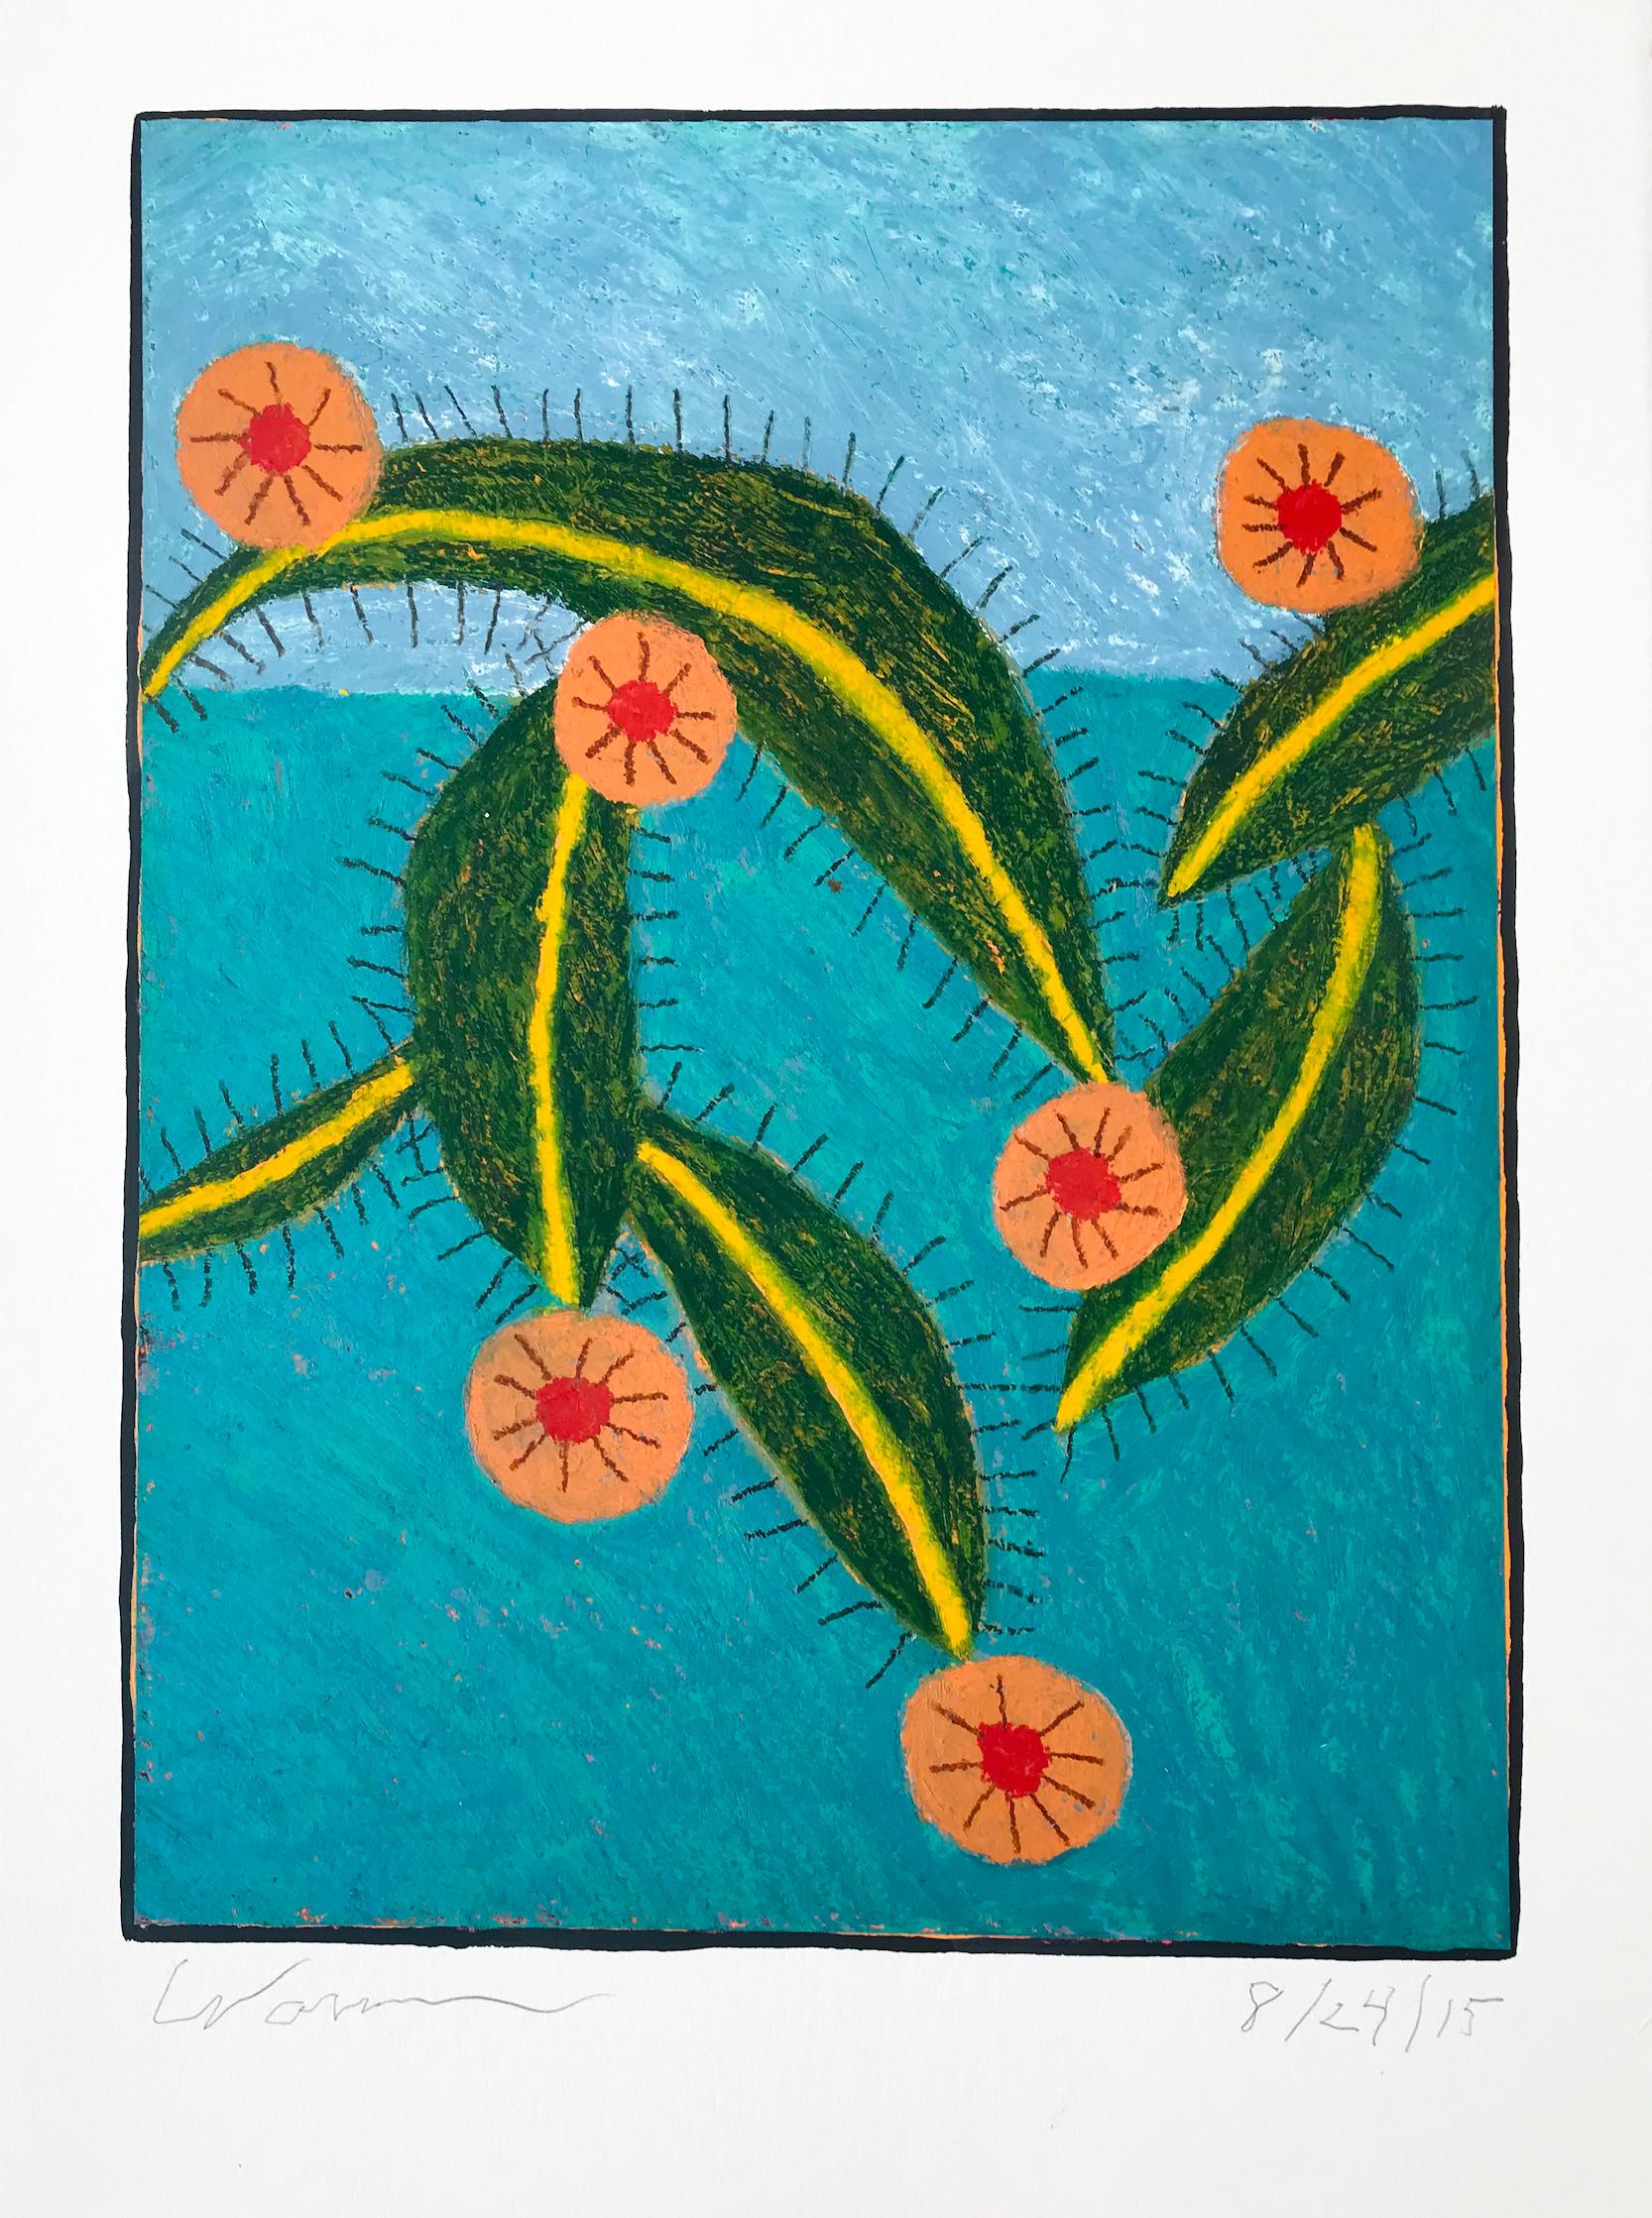 Skyline Drive Wildflowers and Cacti - Mixed Media Art by Russ Warren